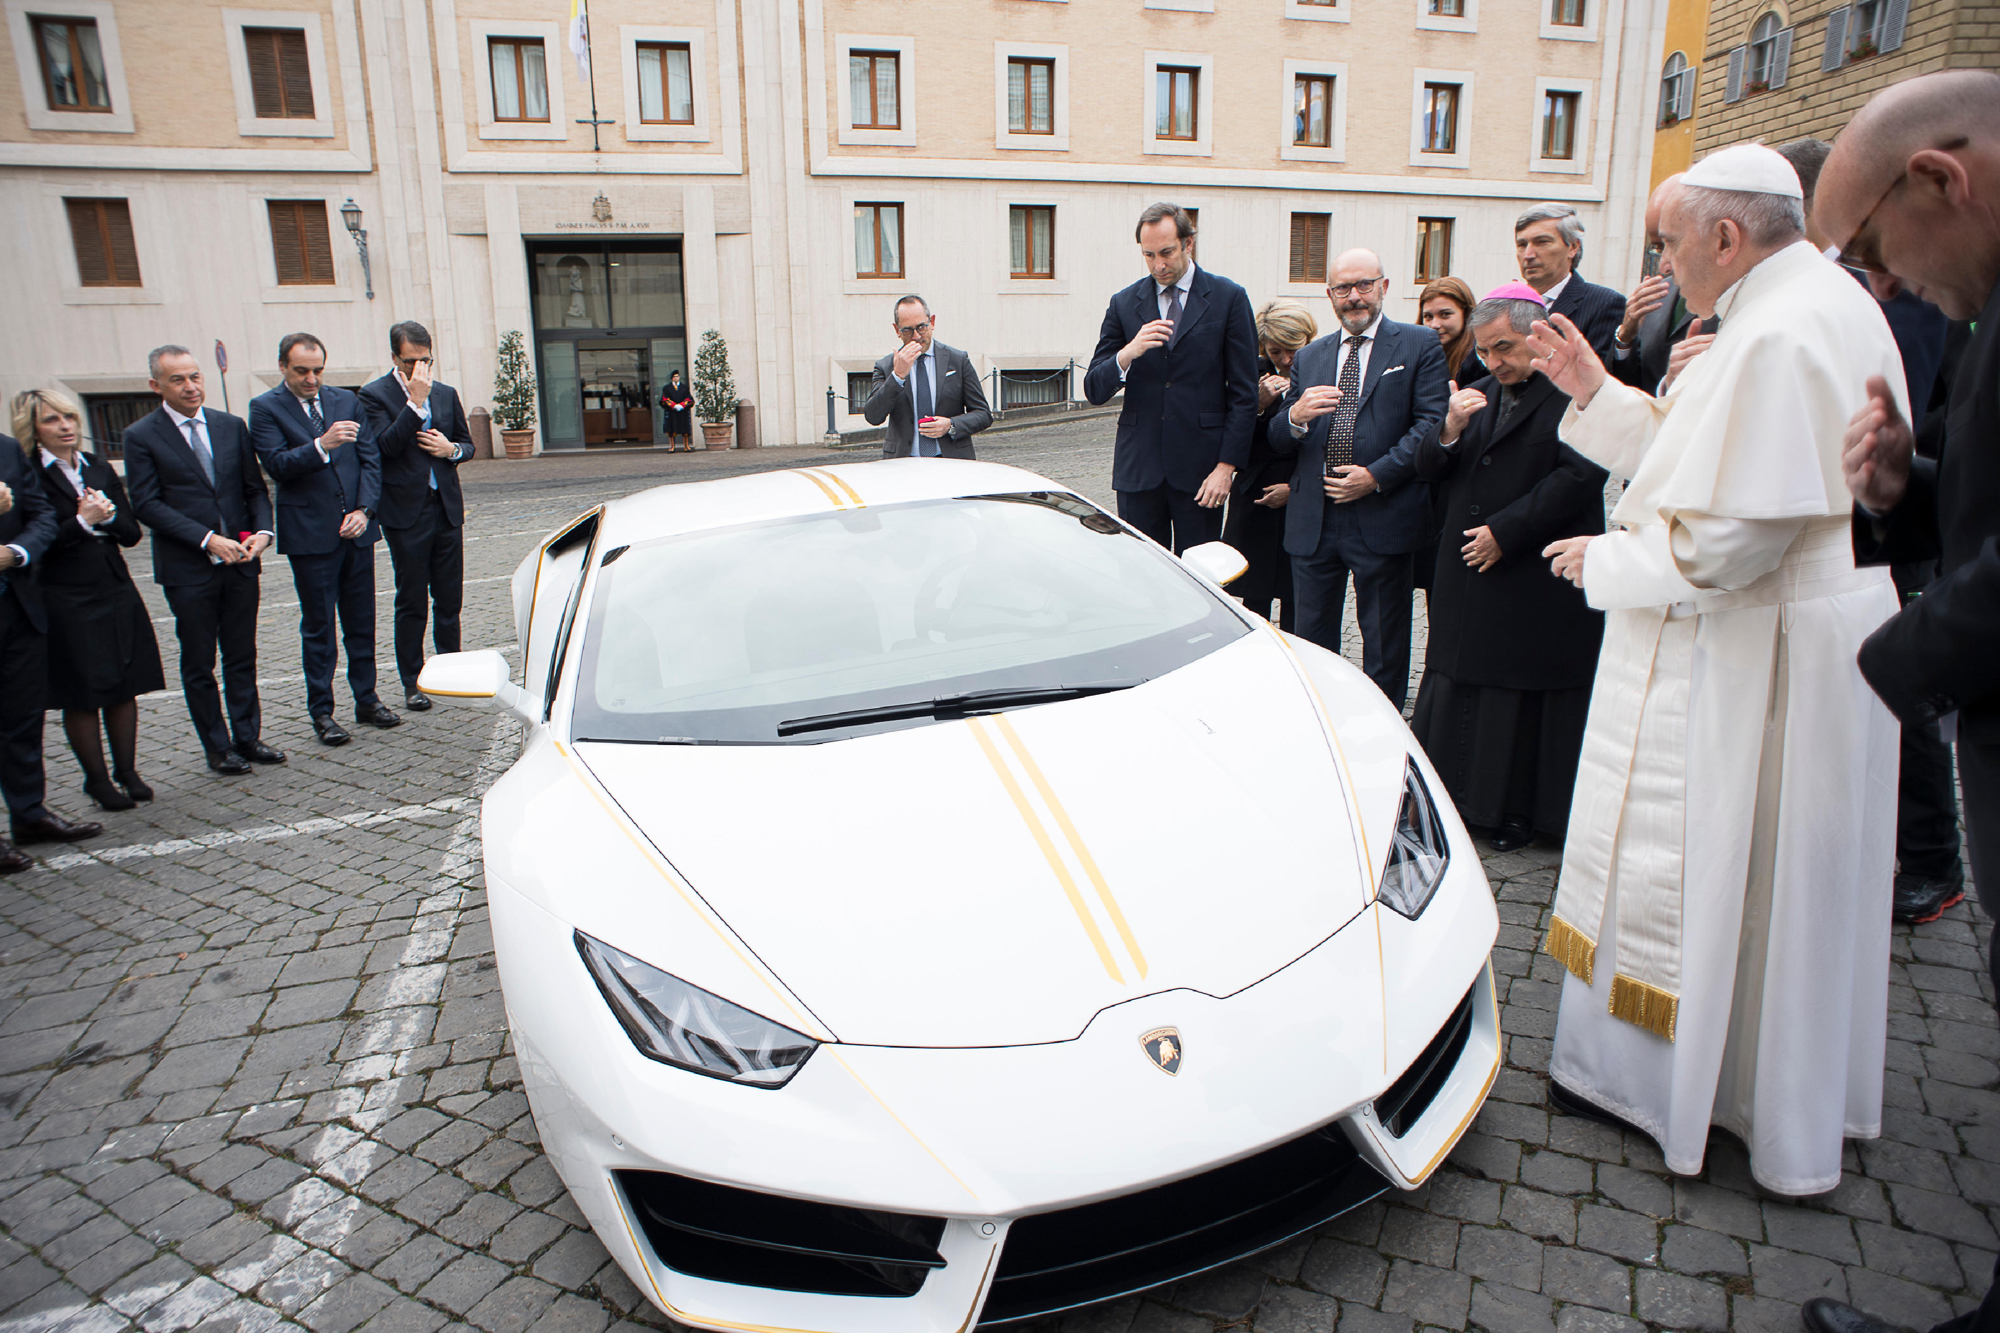 Papal Lamborghini up for auction at Sotherby's